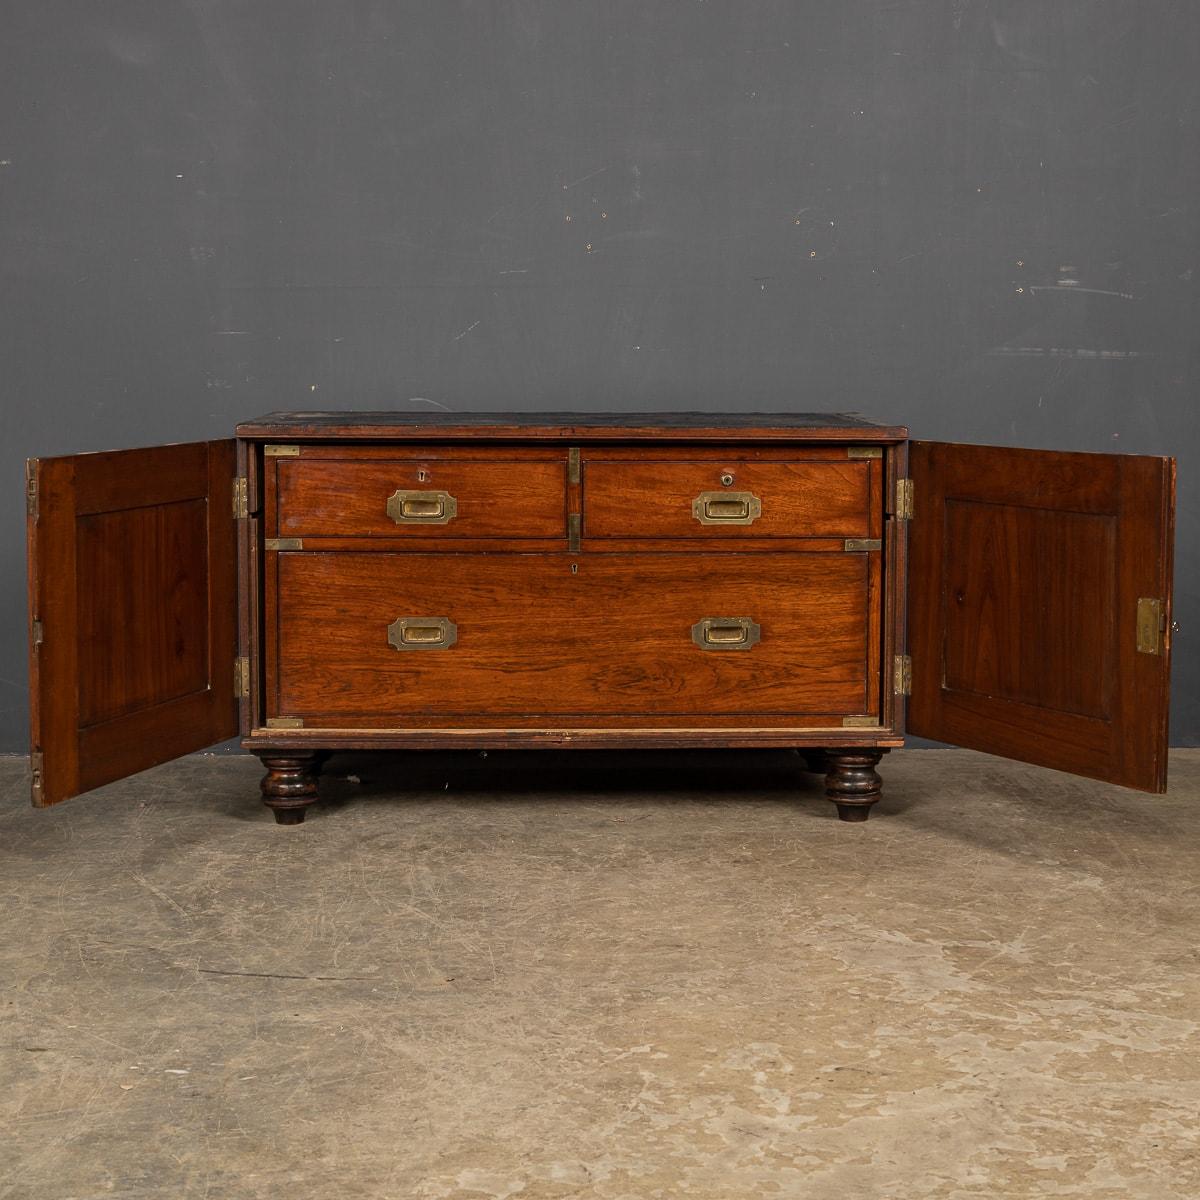 19th Century Victorian Solid Mahogany & Brass Campaign Dresser, c.1860 For Sale 5